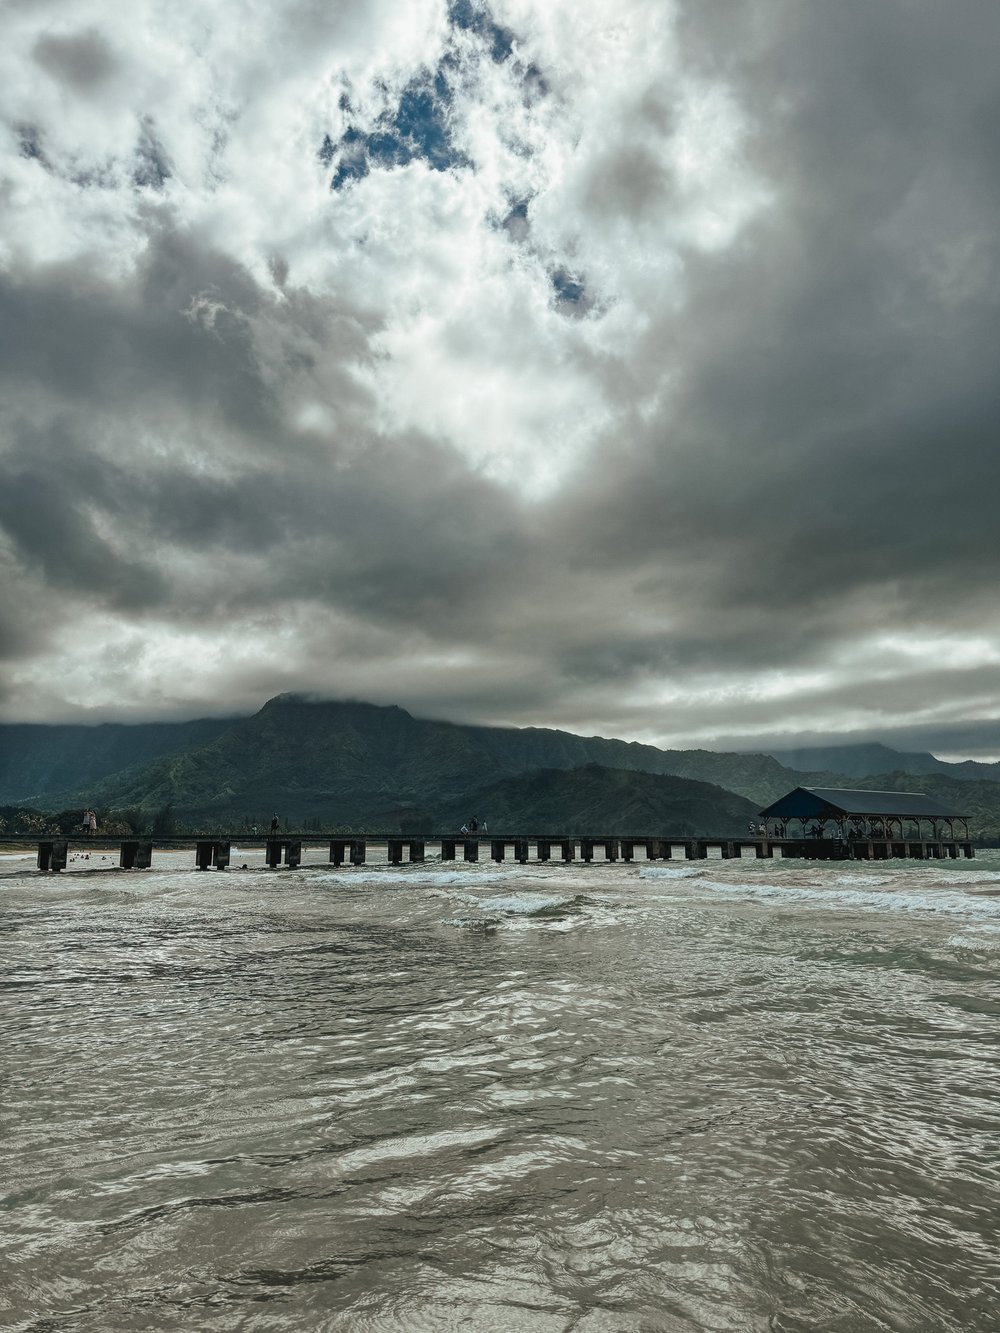  View of the entire  Hanalei Pier  